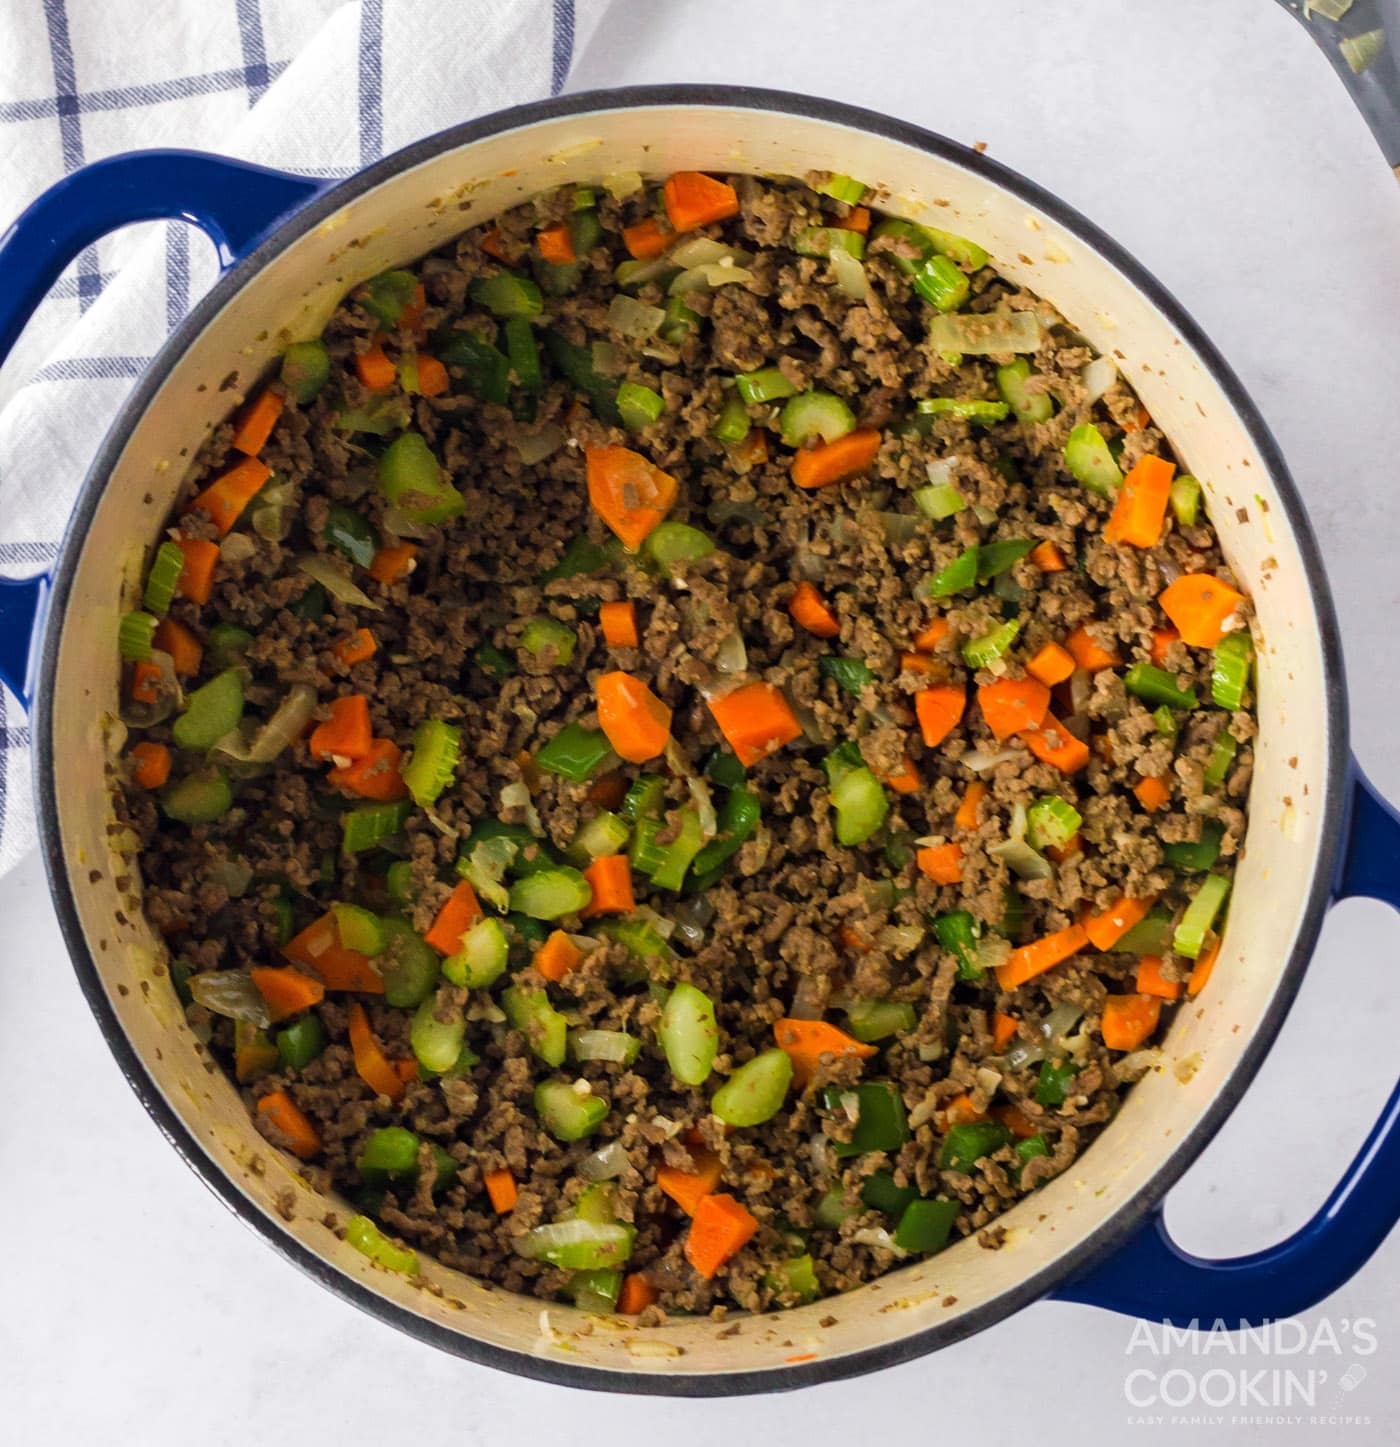 Ground beef, celery, carrot, onion, green bell pepper and garlic in a pot